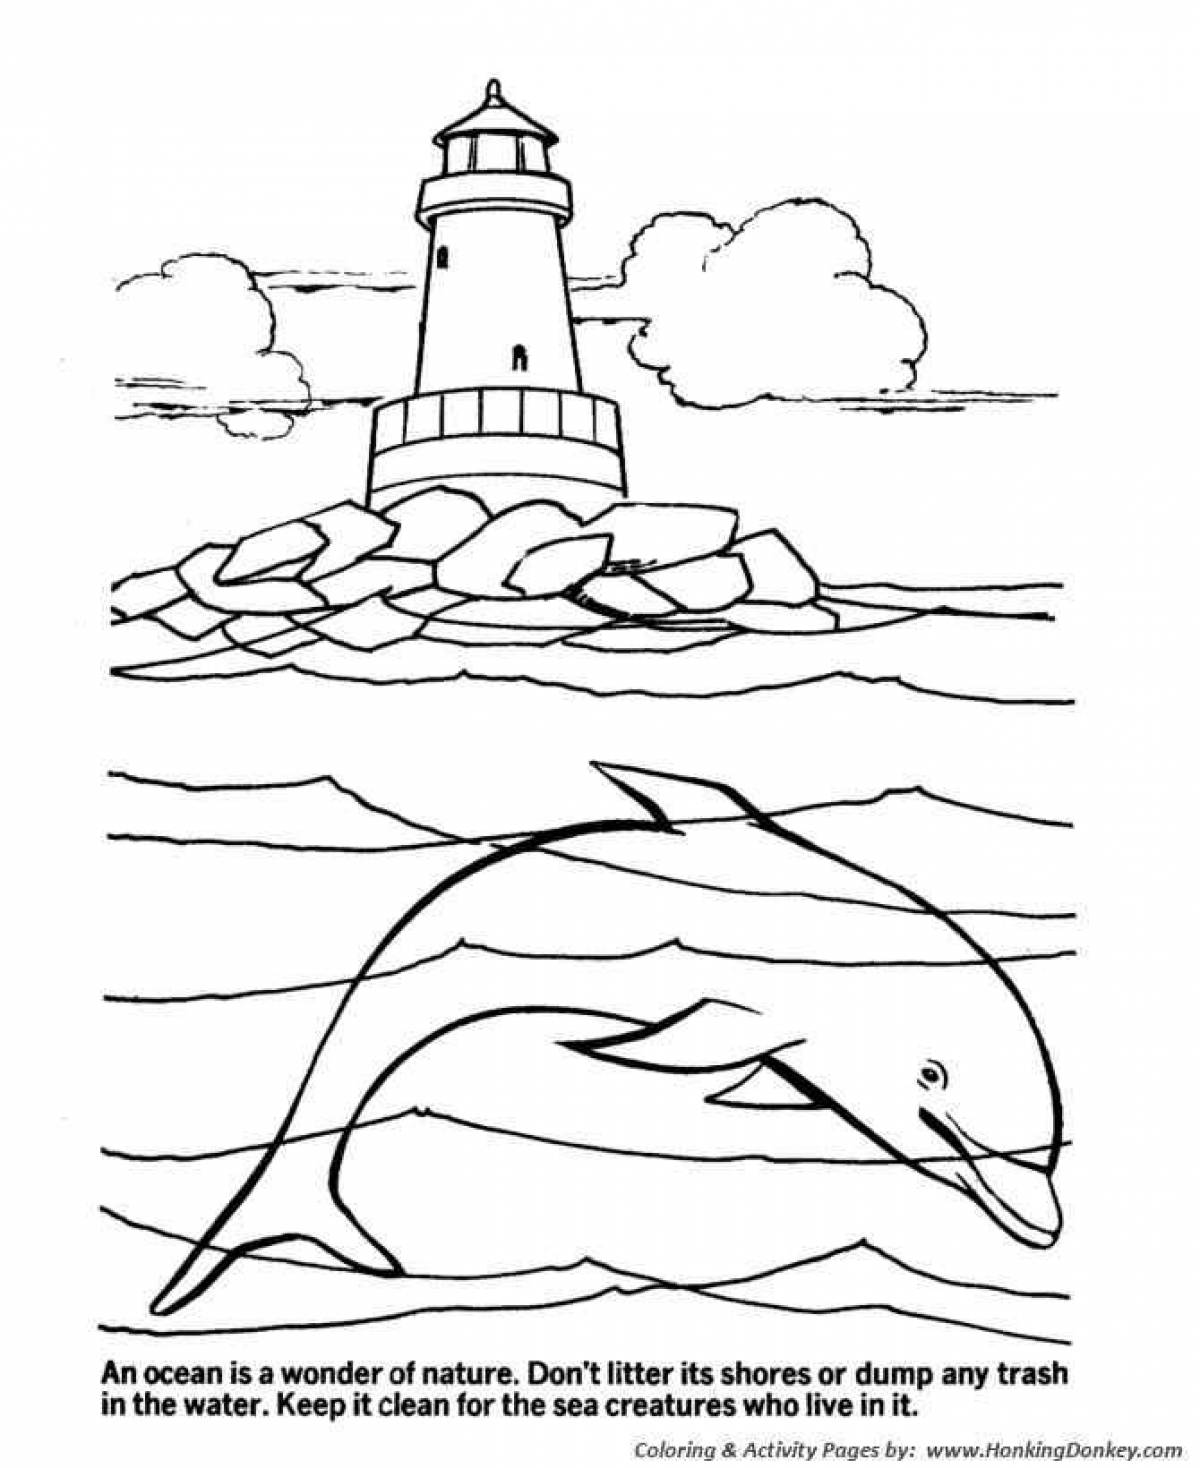 Blessed Crimea coloring page